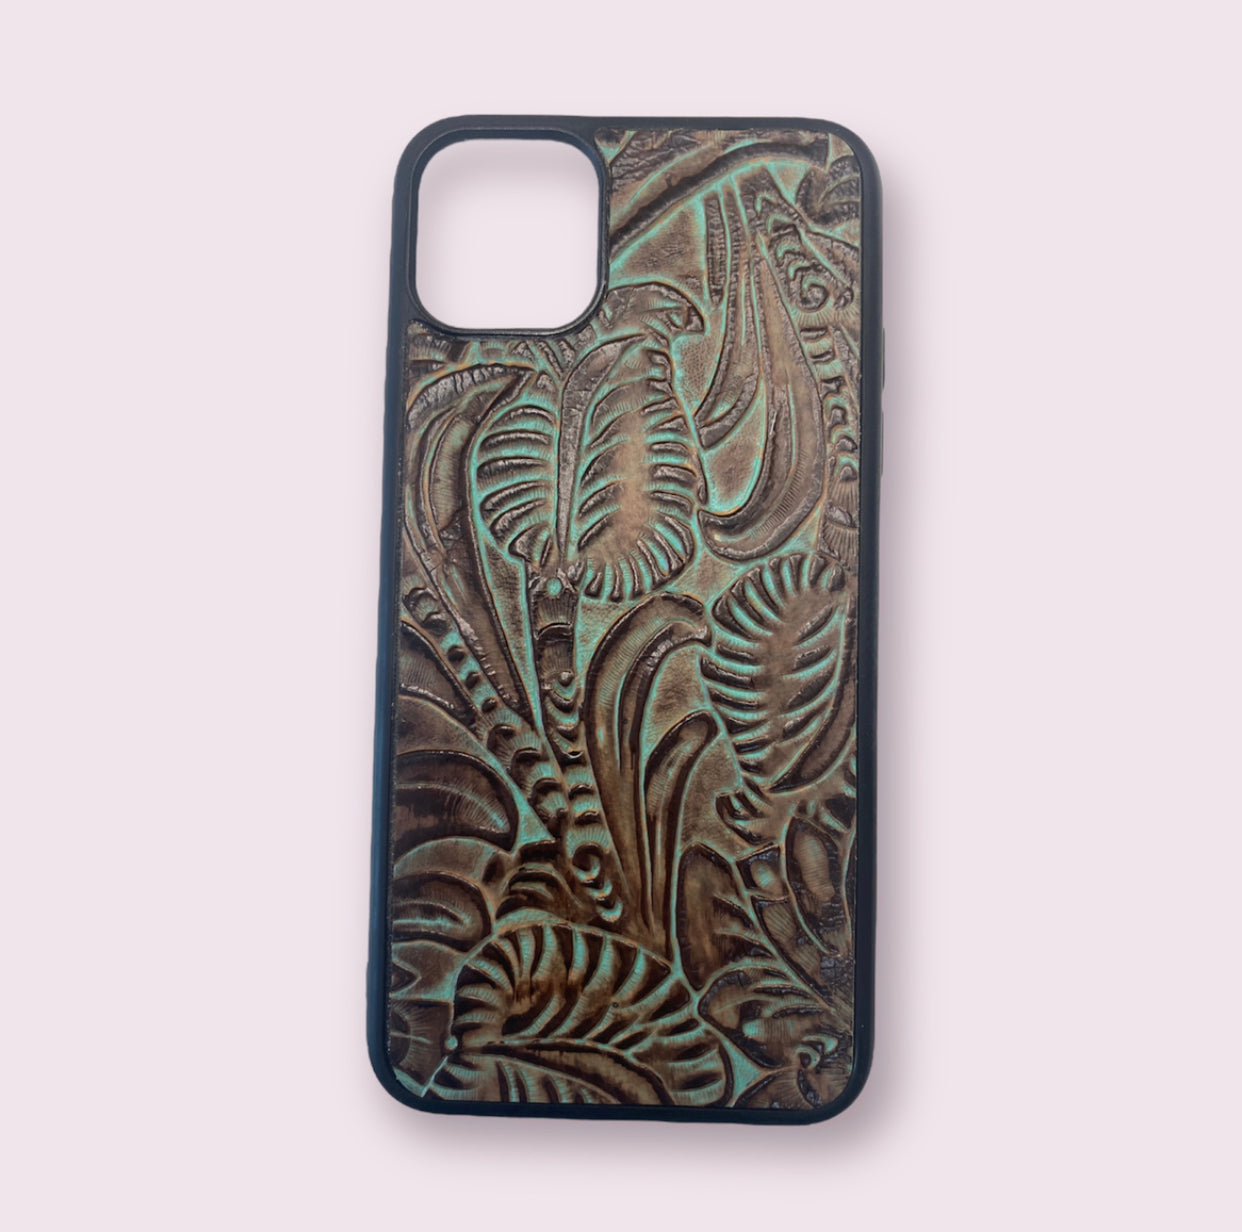 A8353 - IPhone 11 Pro Max Tooled Leather Case